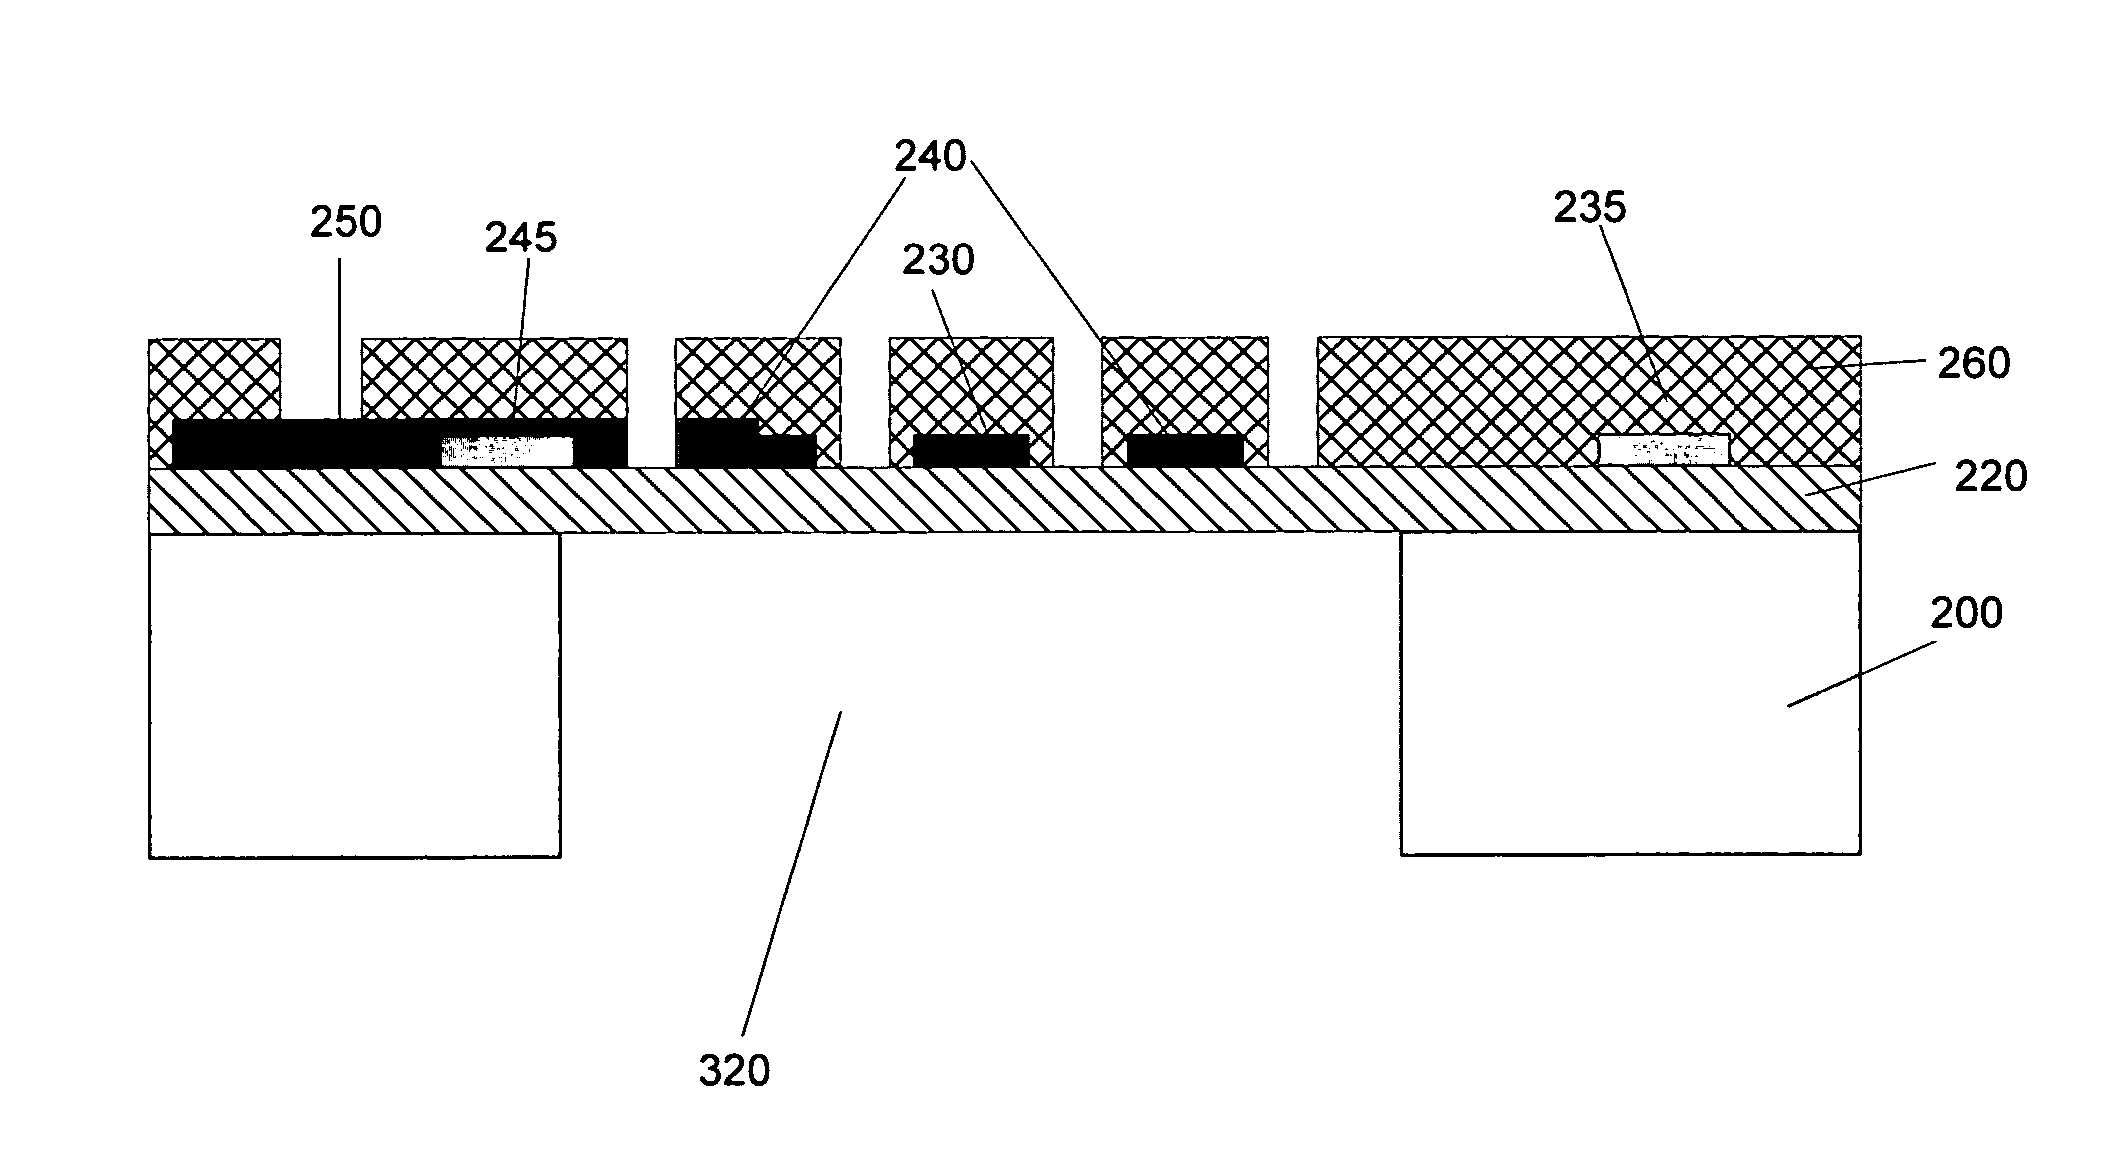 Method of manufacturing a flow rate sensor